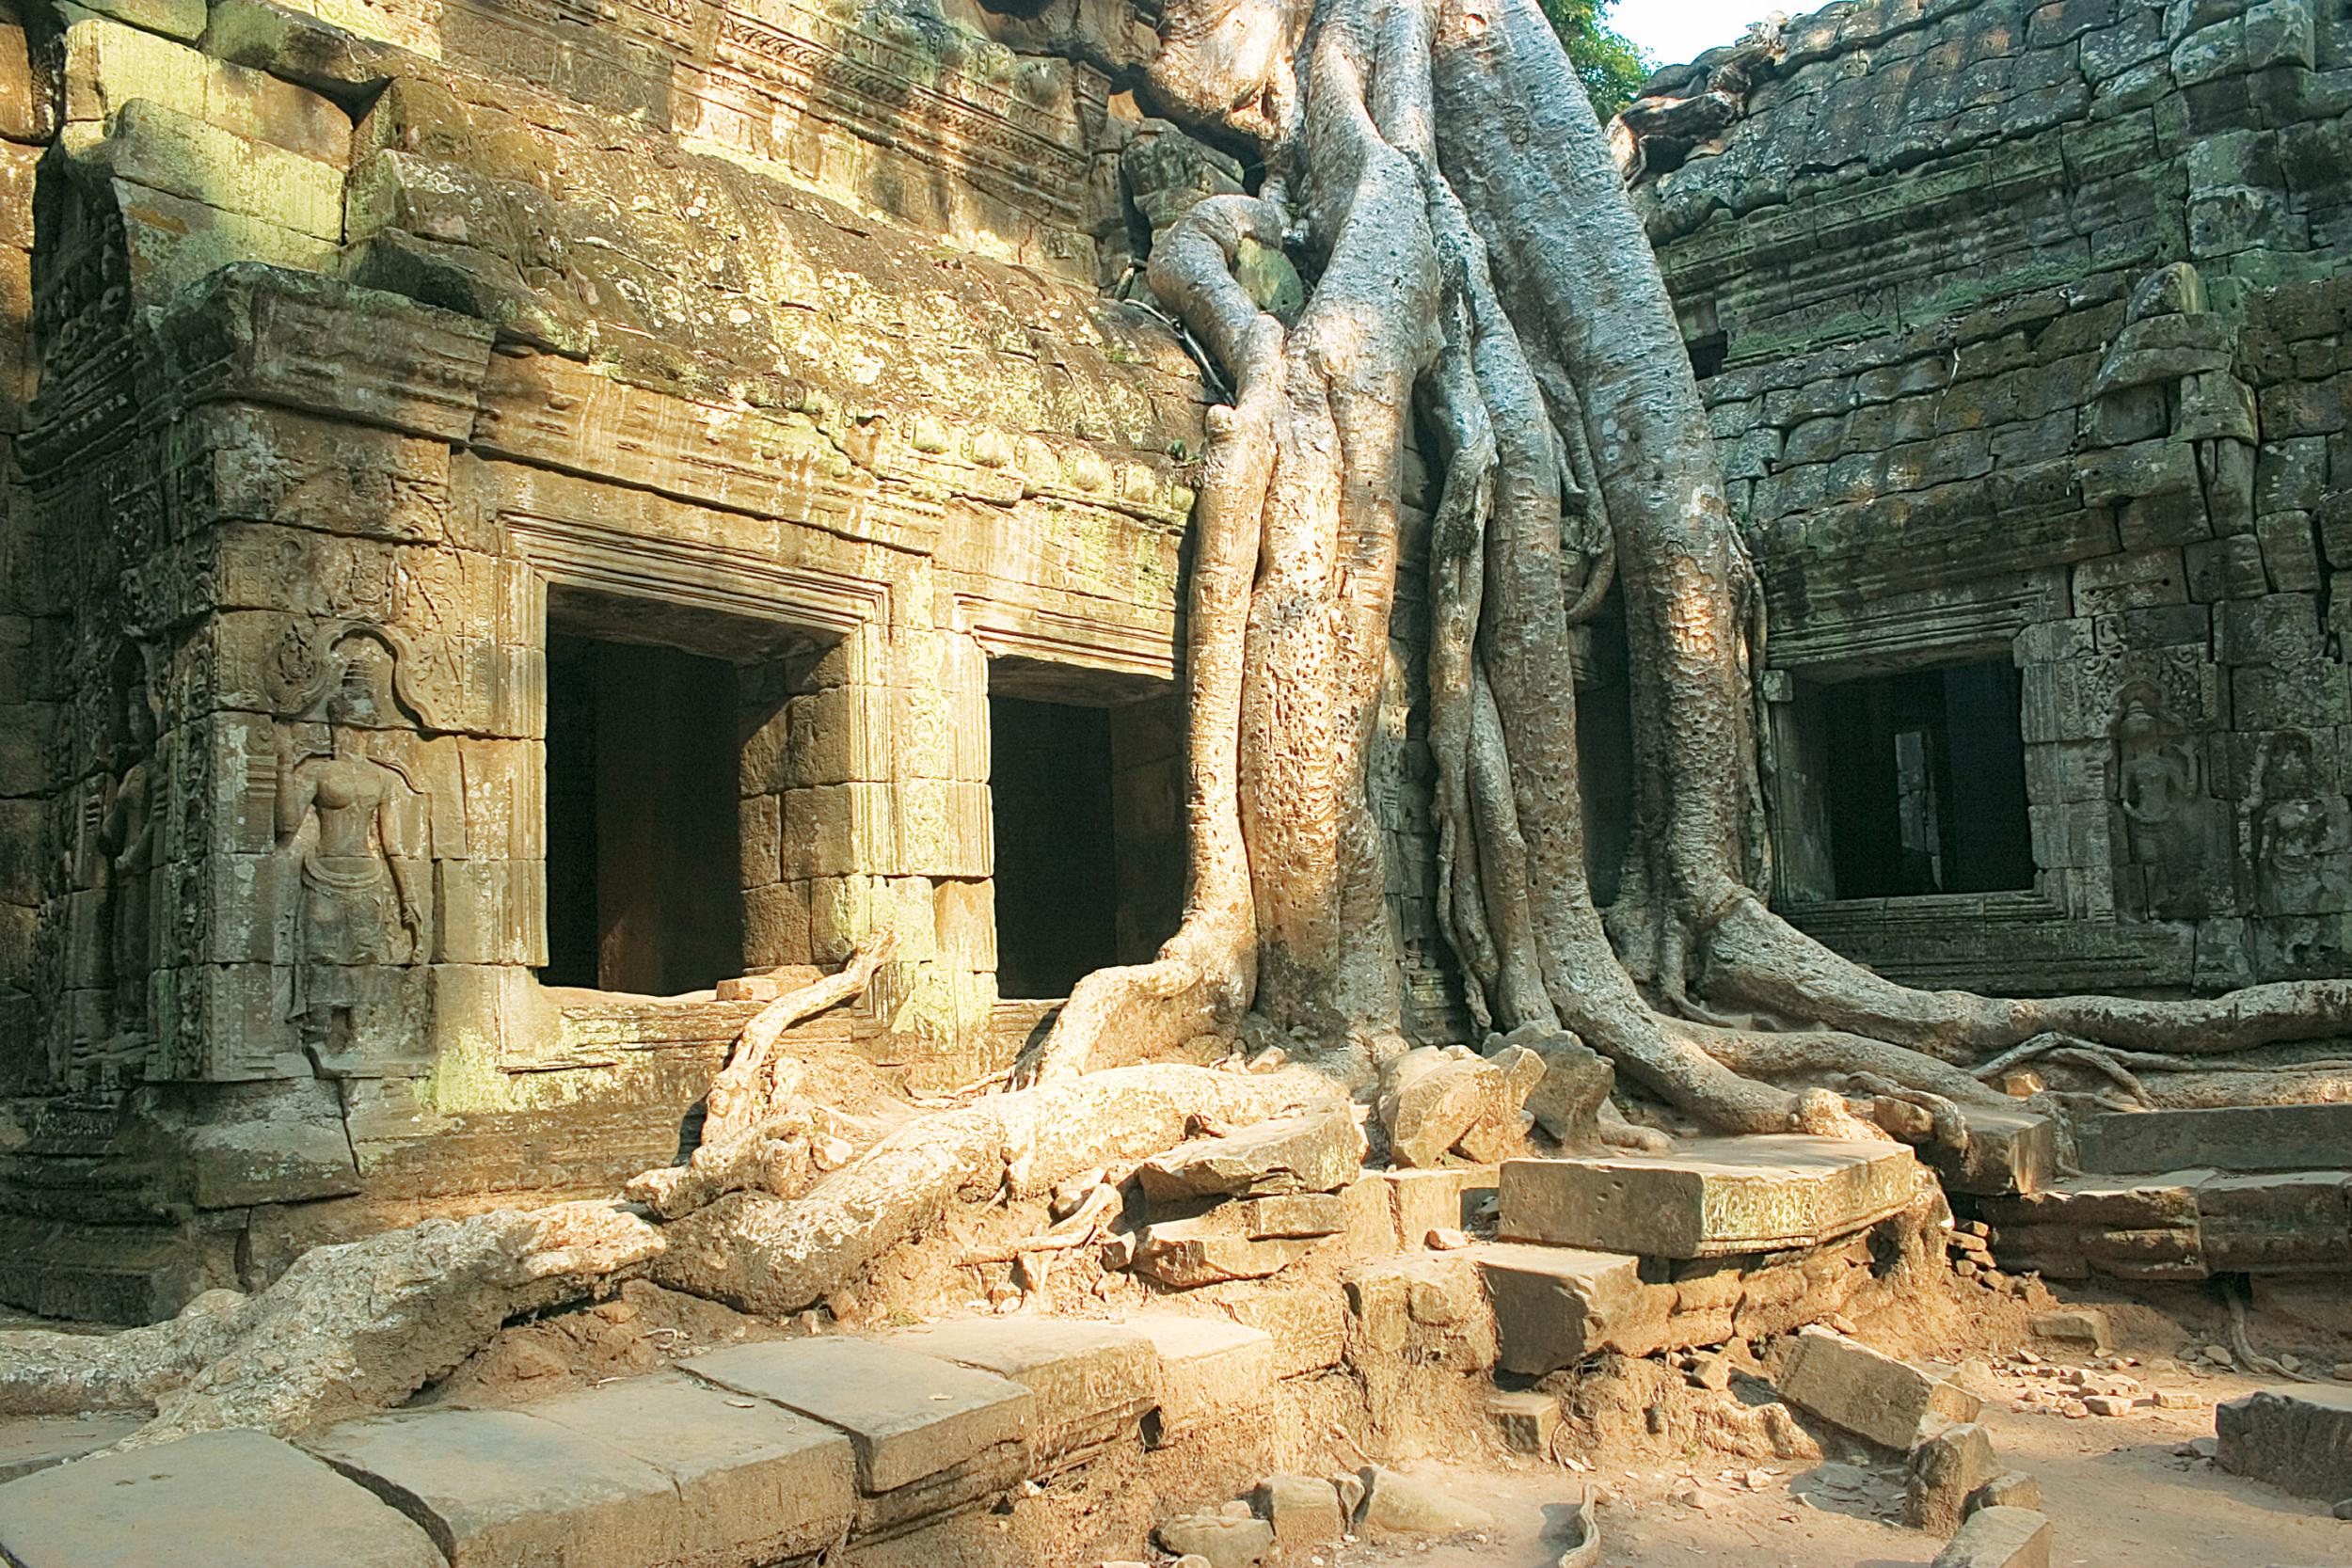 An overgrown temple at Siem Reap, where Apopo is based in Cambodia